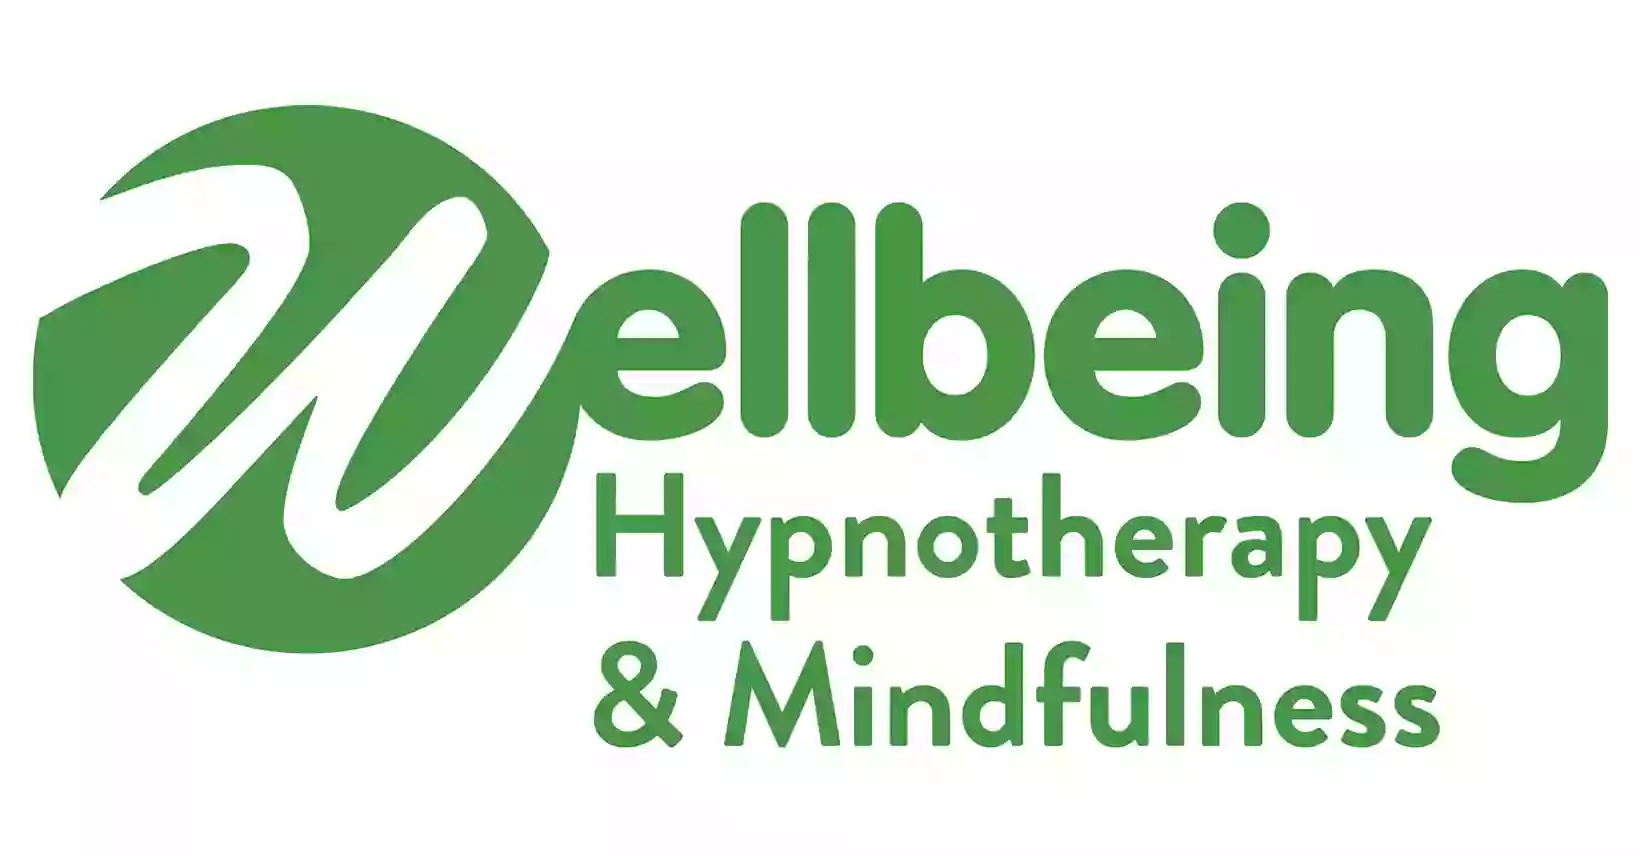 Wellbeing Hypnotherapy & Mindfulness